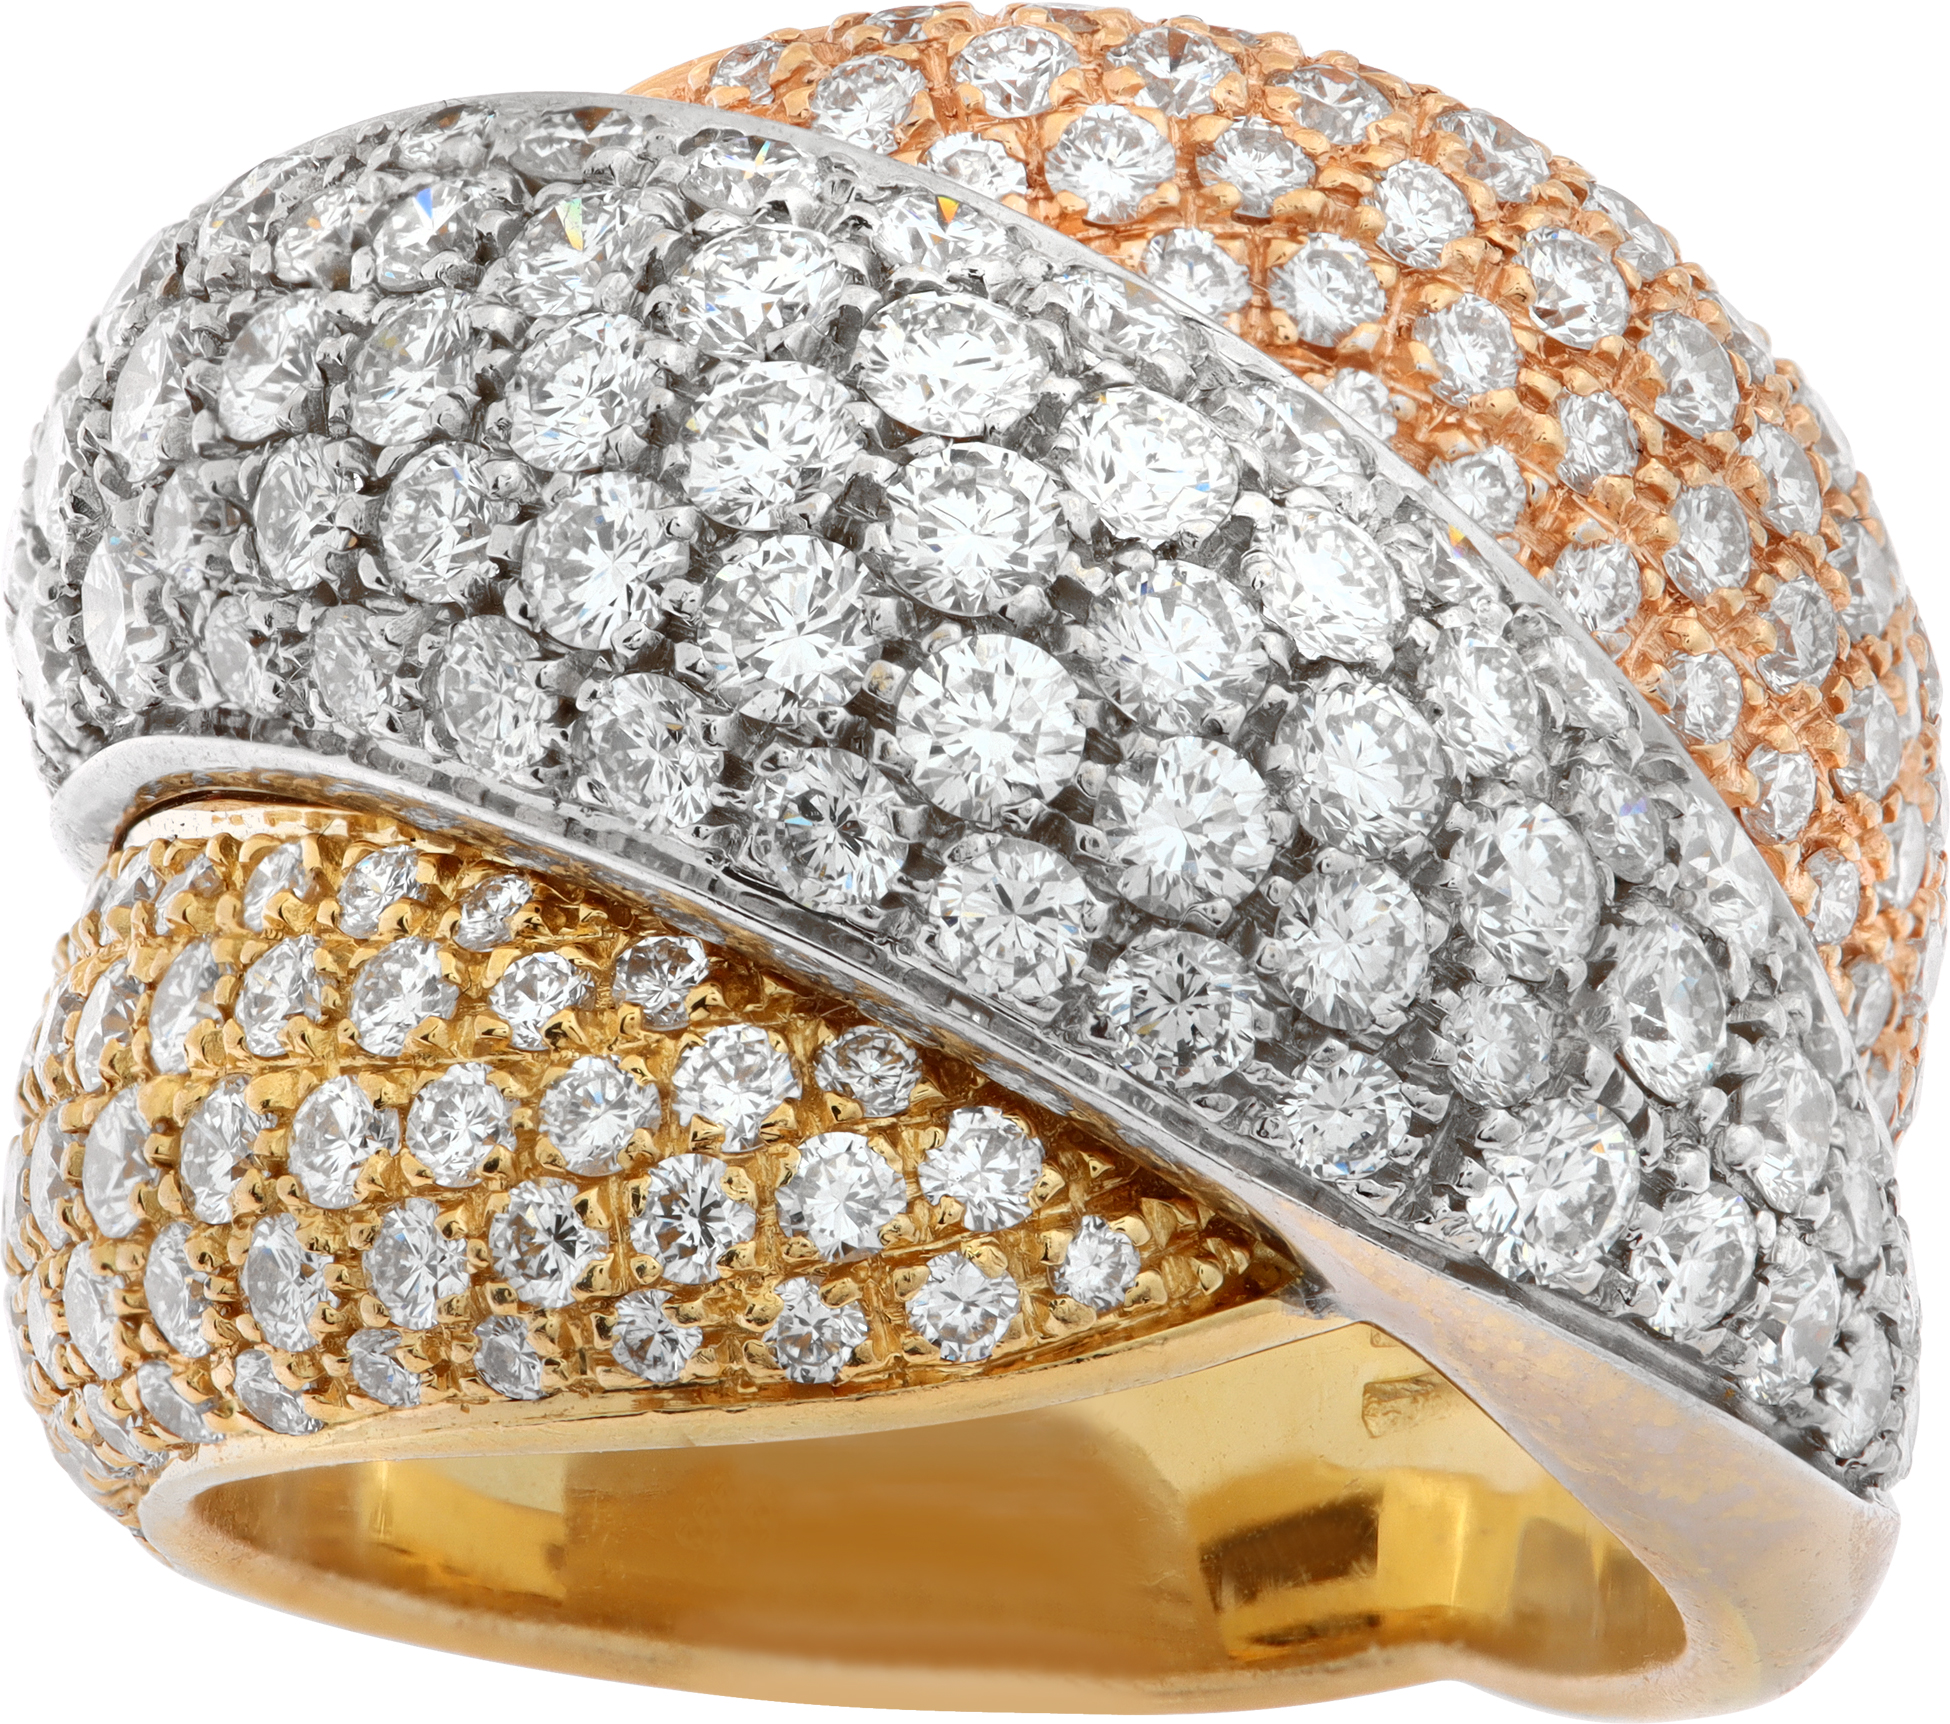 Damiani Gomitolo diamond ring in 18k white yellow and rose gold